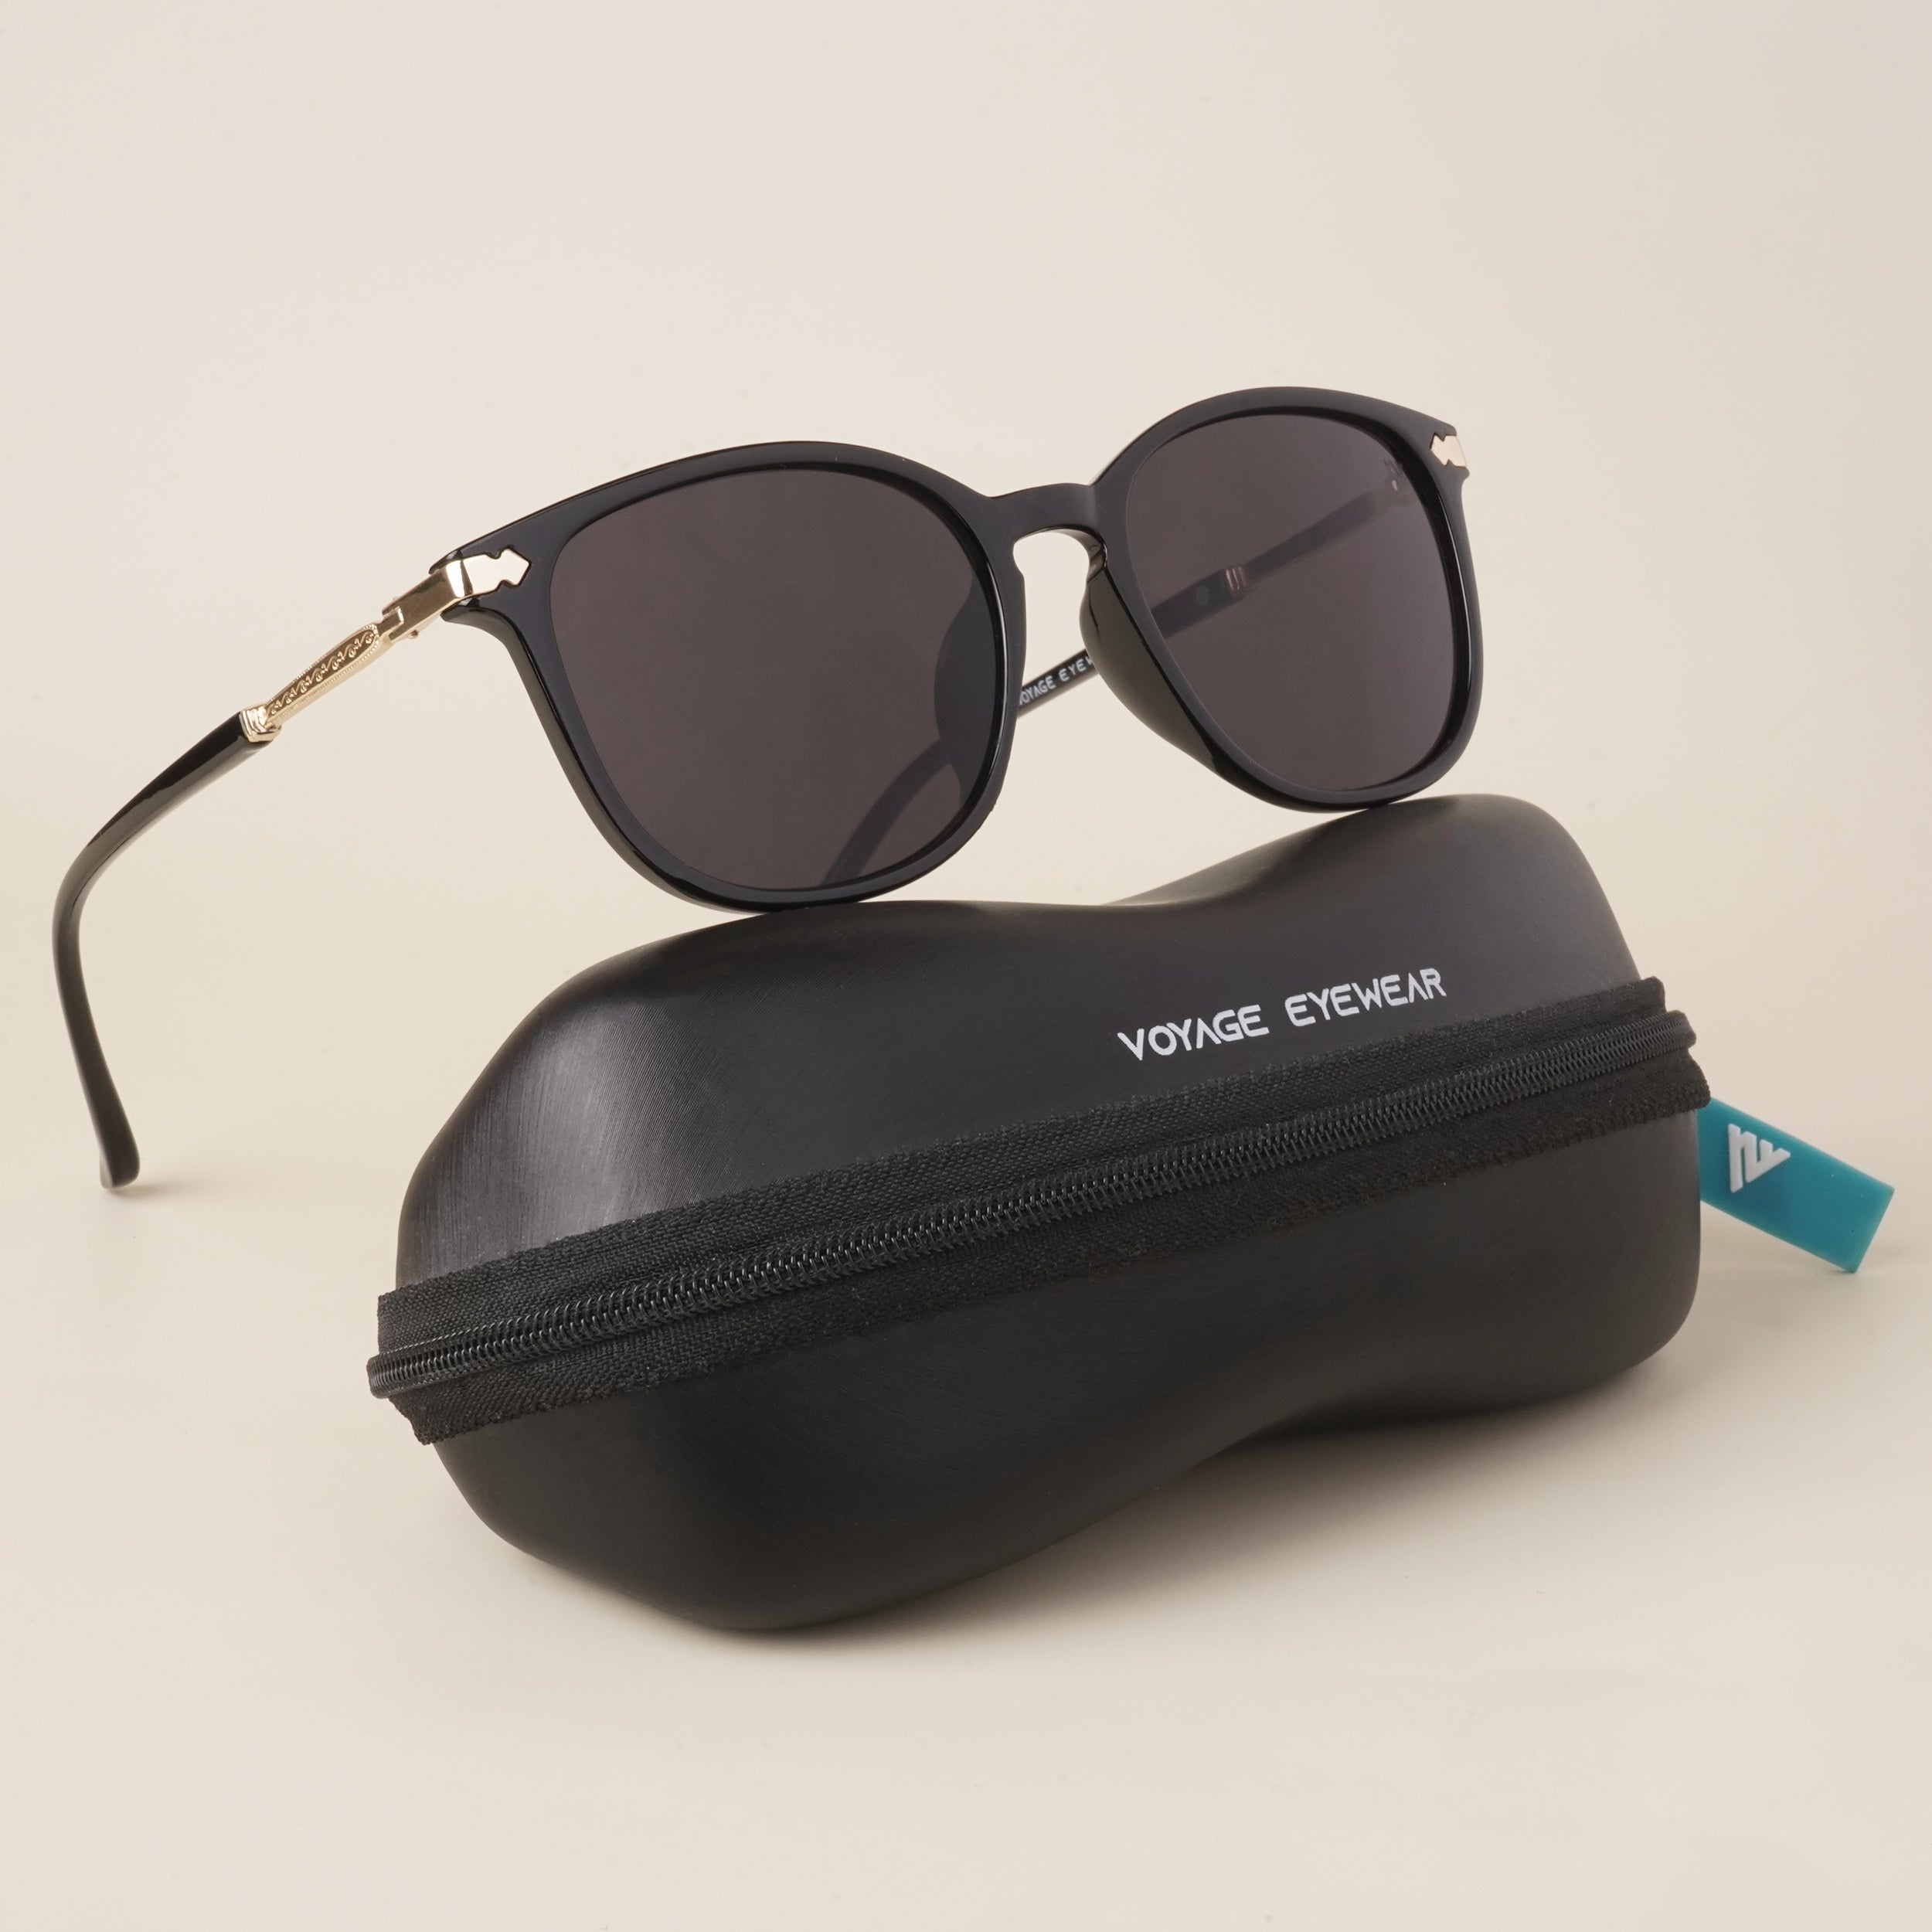 Voyage Black Over Size Sunglasses - MG3182